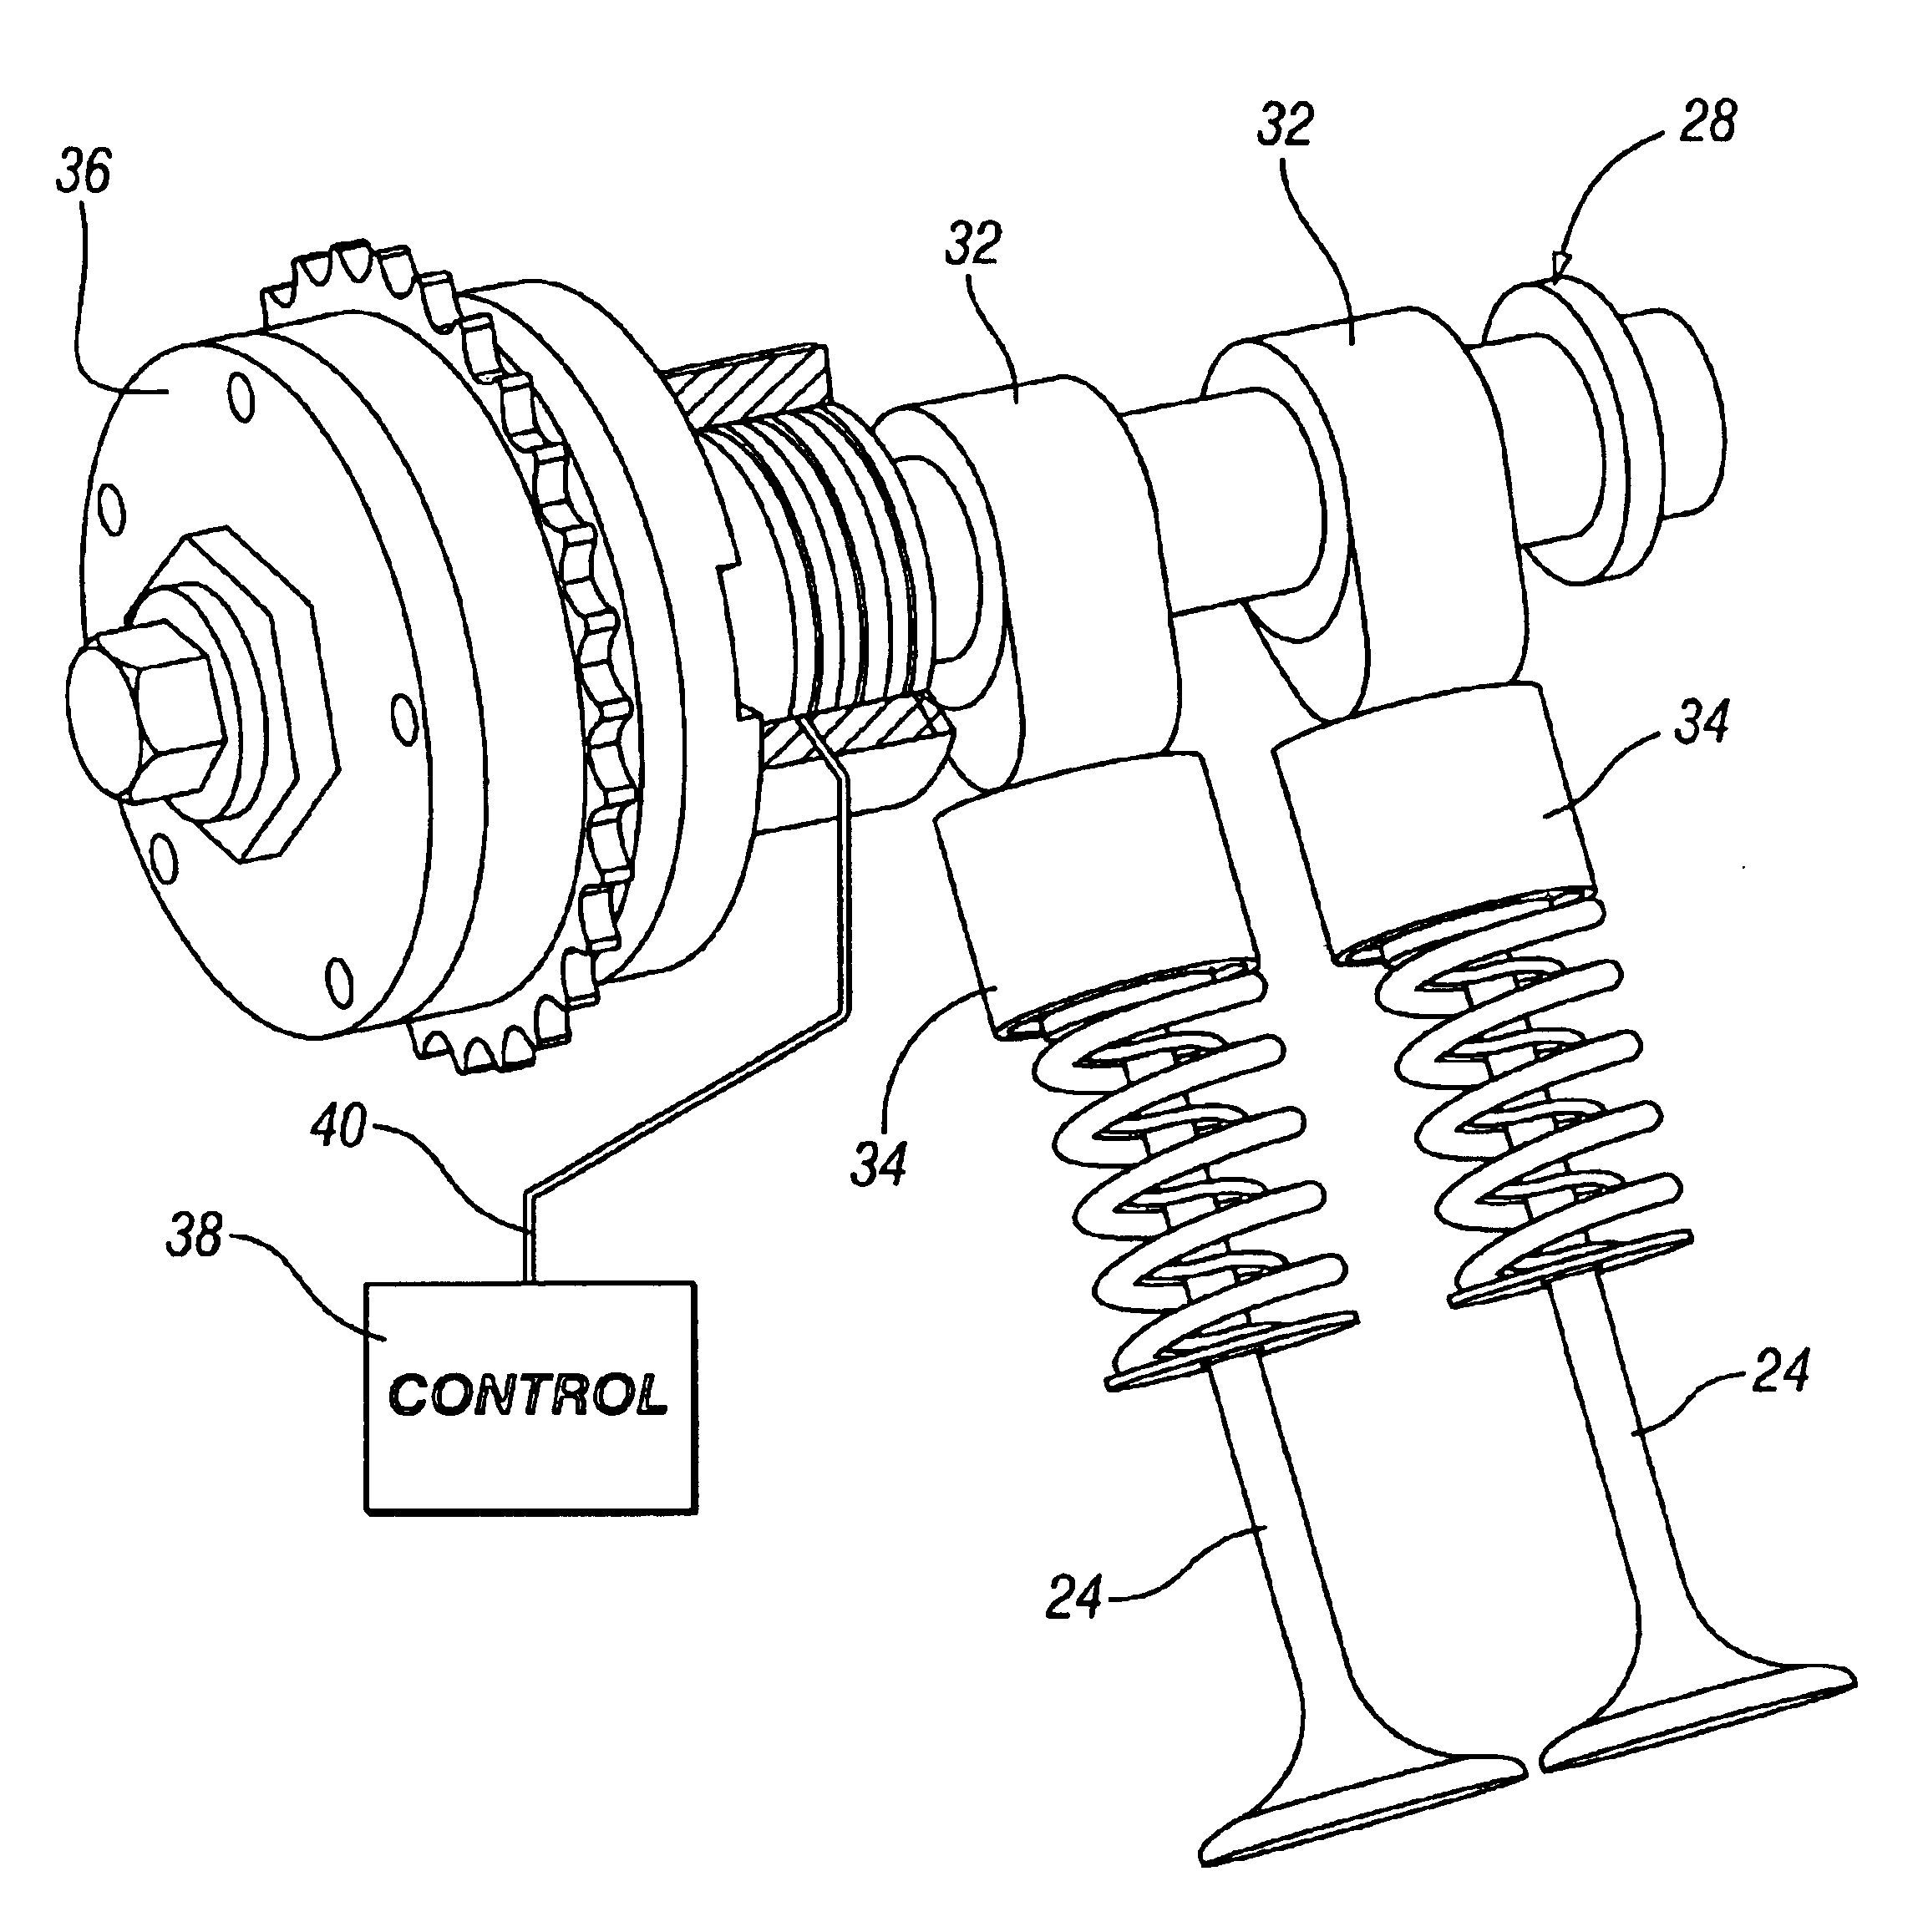 Diesel engine with cam phasers for in-cylinder temperature control